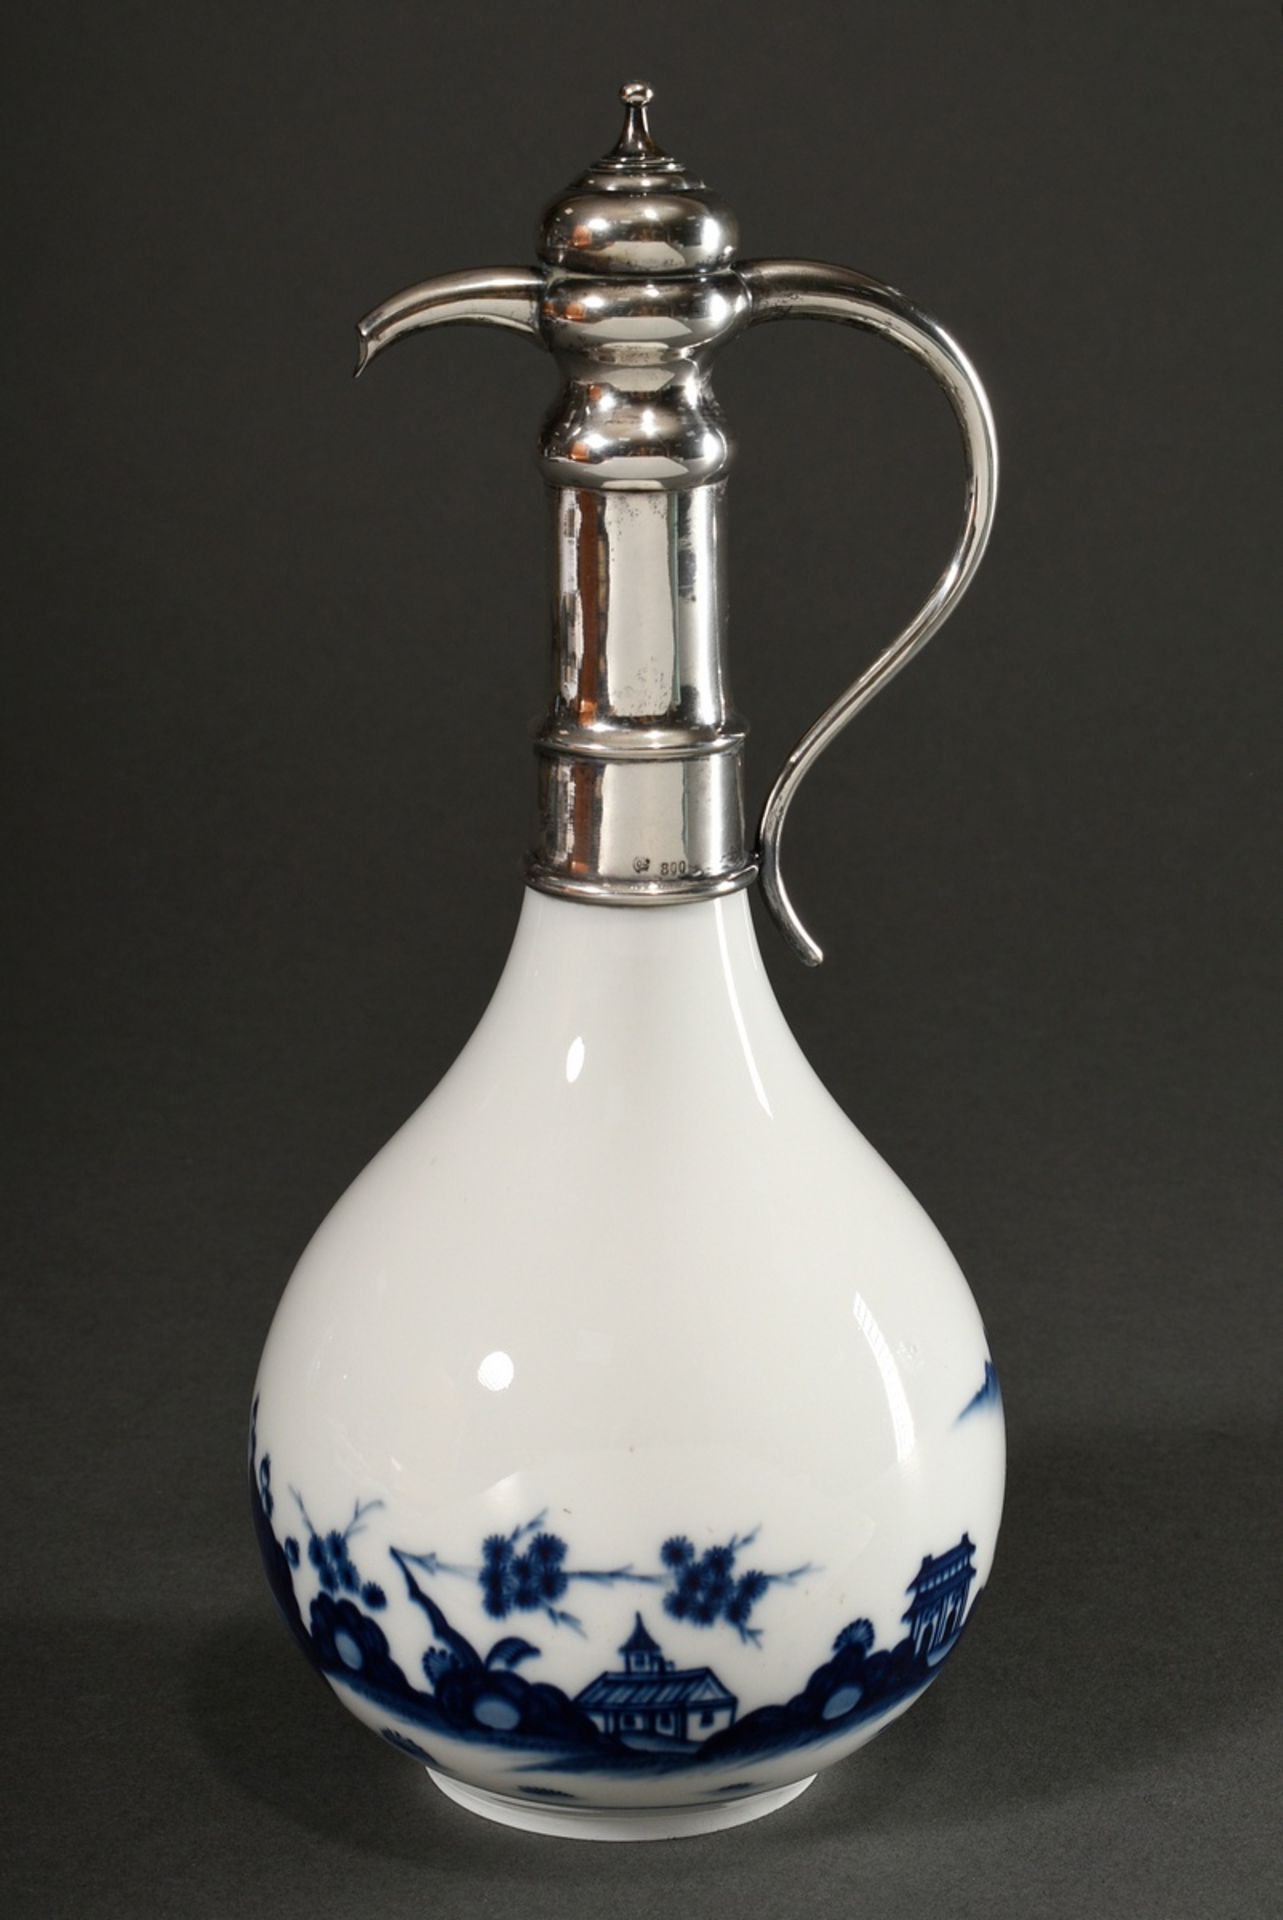 Meissen jug with blue painting decoration after Chinese model "Landscape with floral staffage" and 